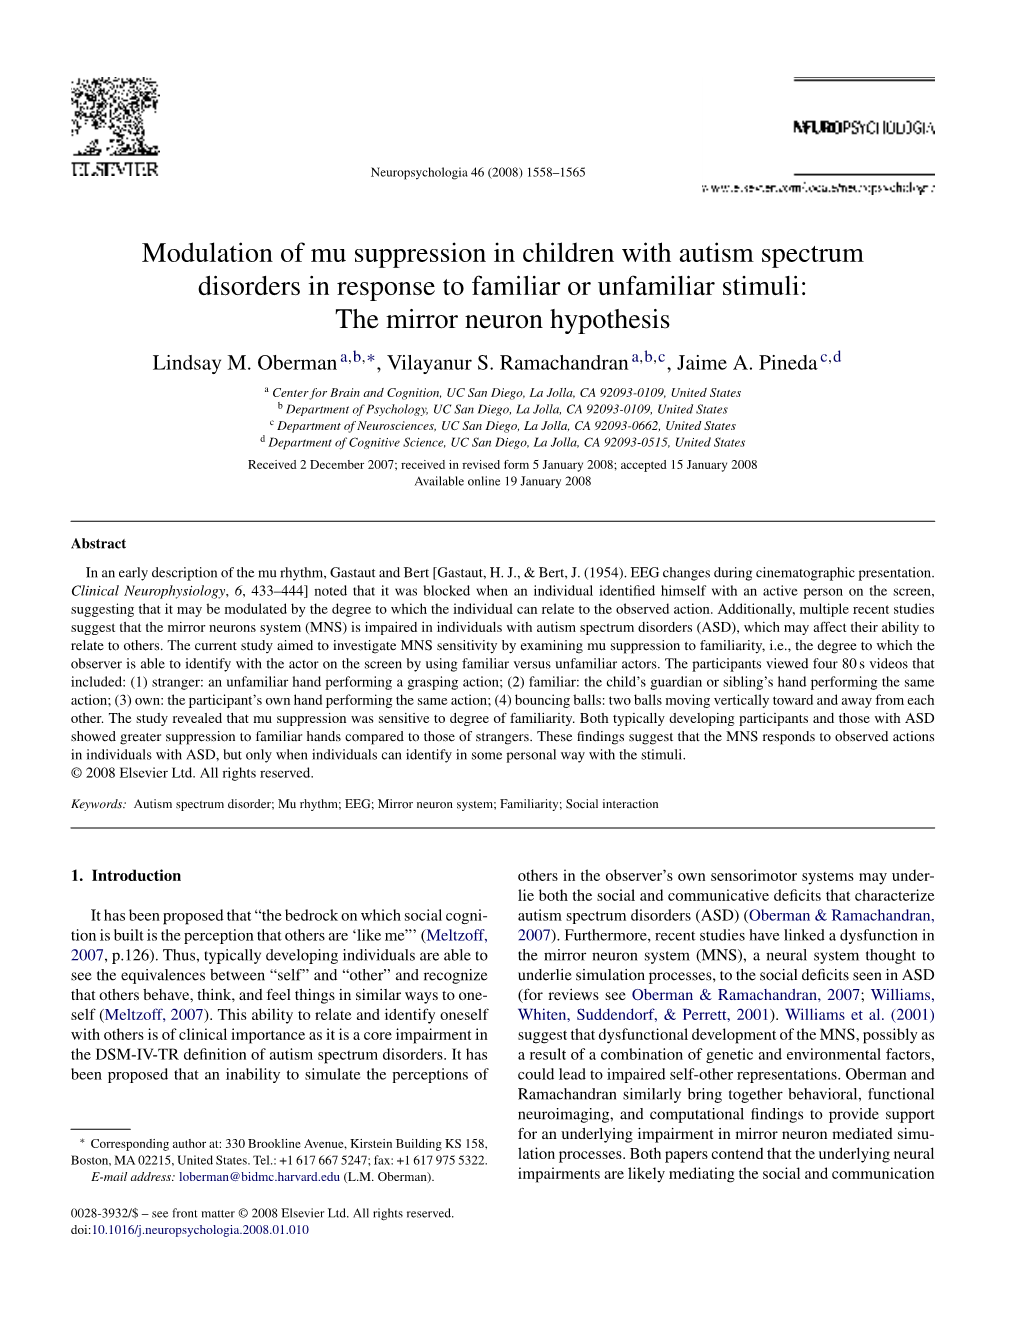 Modulation of Mu Suppression in Children with Autism Spectrum Disorders in Response to Familiar Or Unfamiliar Stimuli: the Mirror Neuron Hypothesis Lindsay M